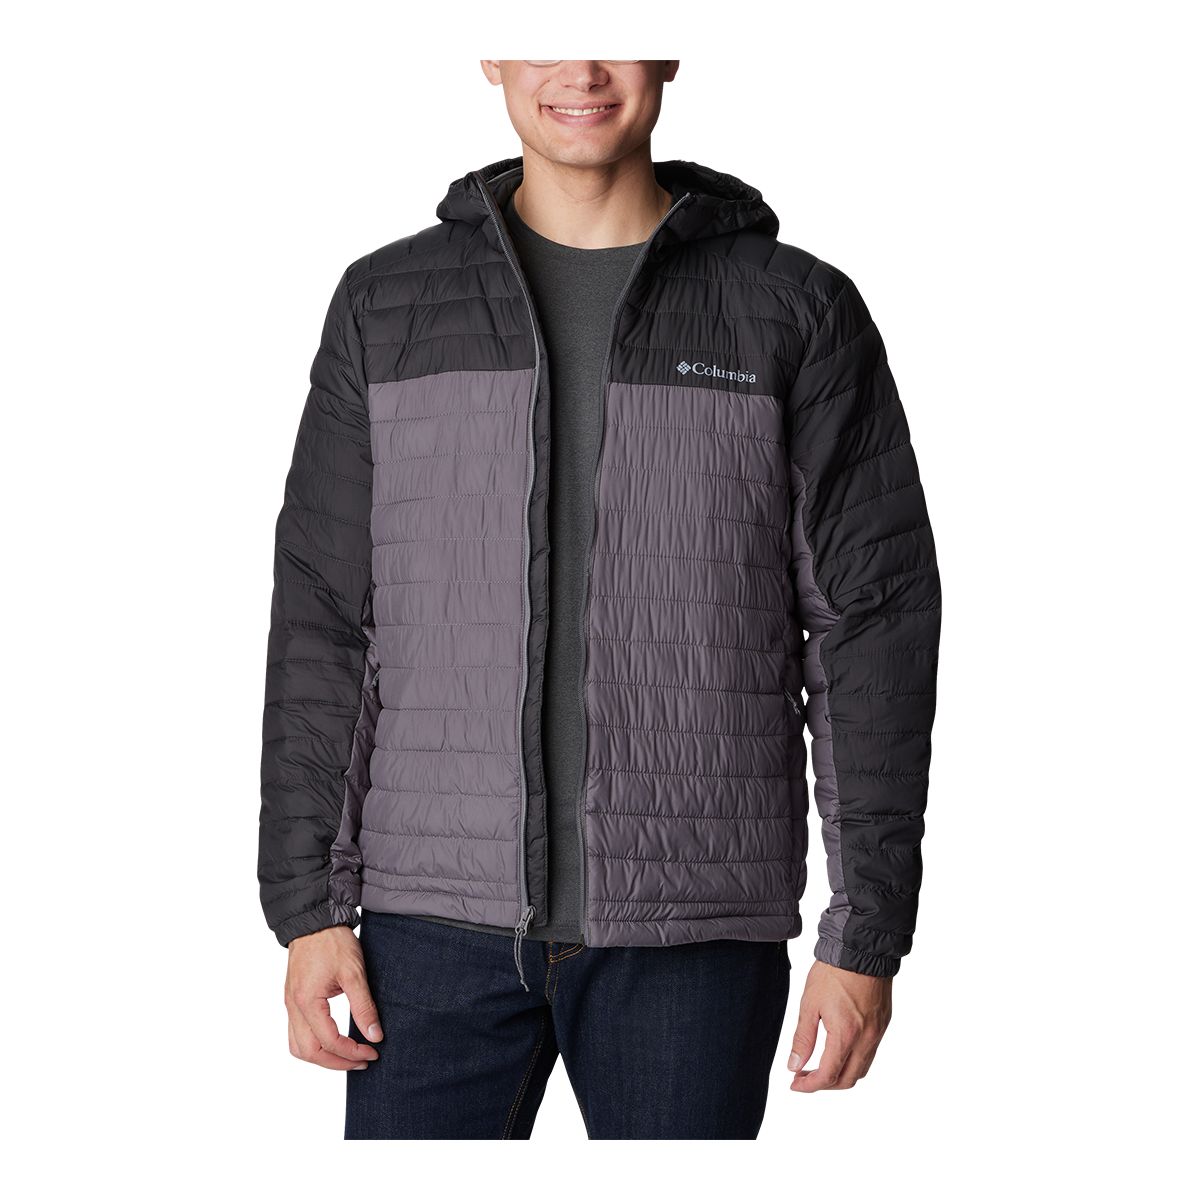 Best Columbia Jacket For Winter On Rent (-16 Degree Ultra Light)